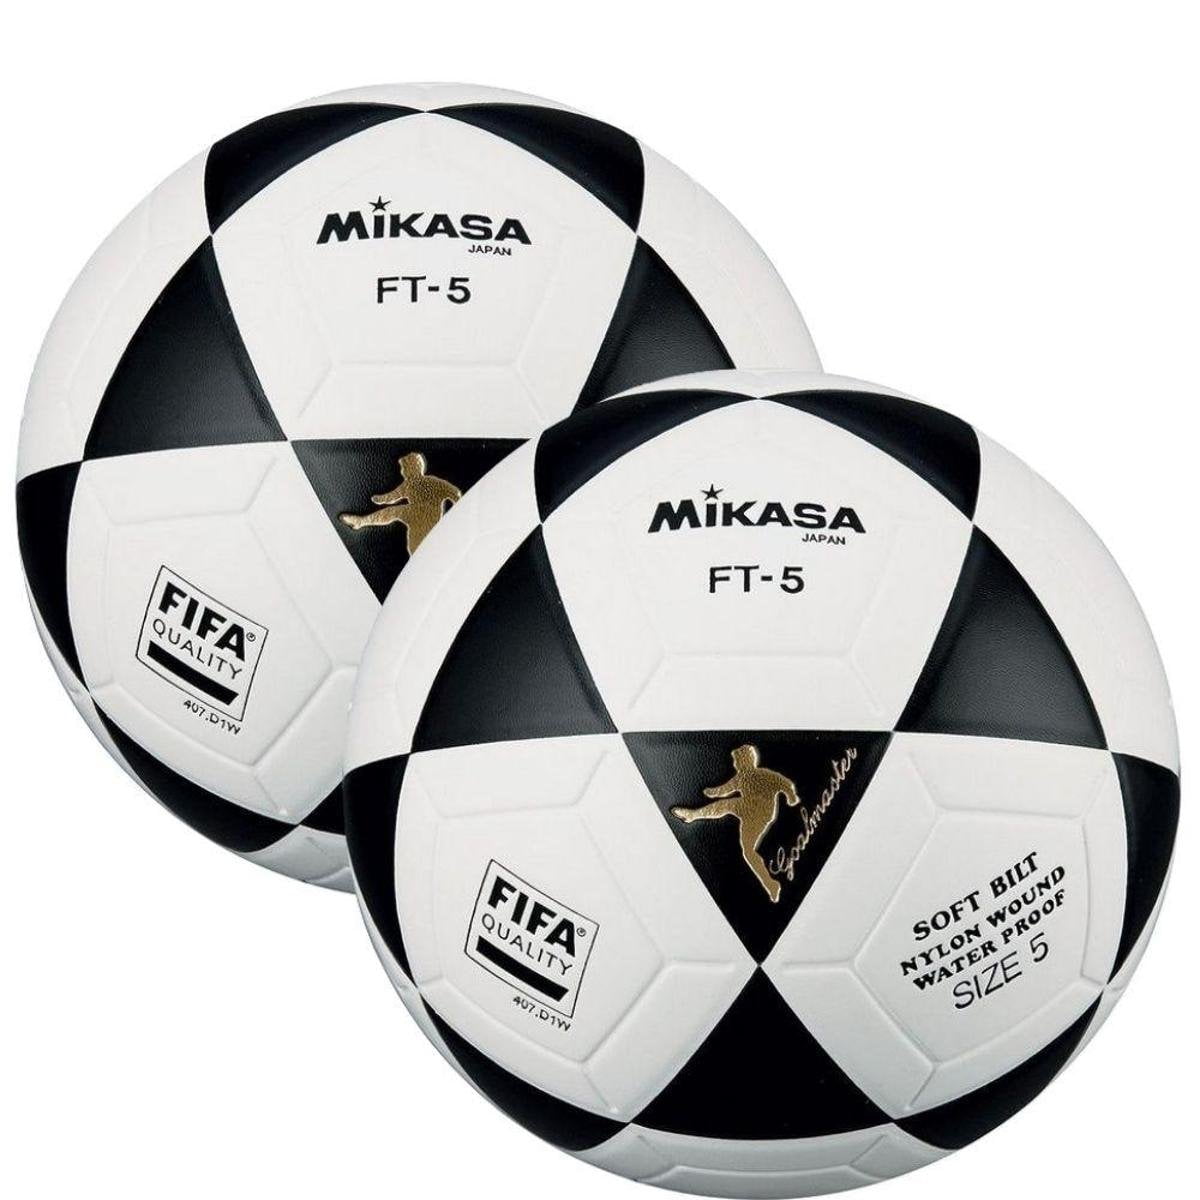 Mikasa FT5 Goal Master Soccer Ball Size 5 White/Green Official Footvolley Ball 